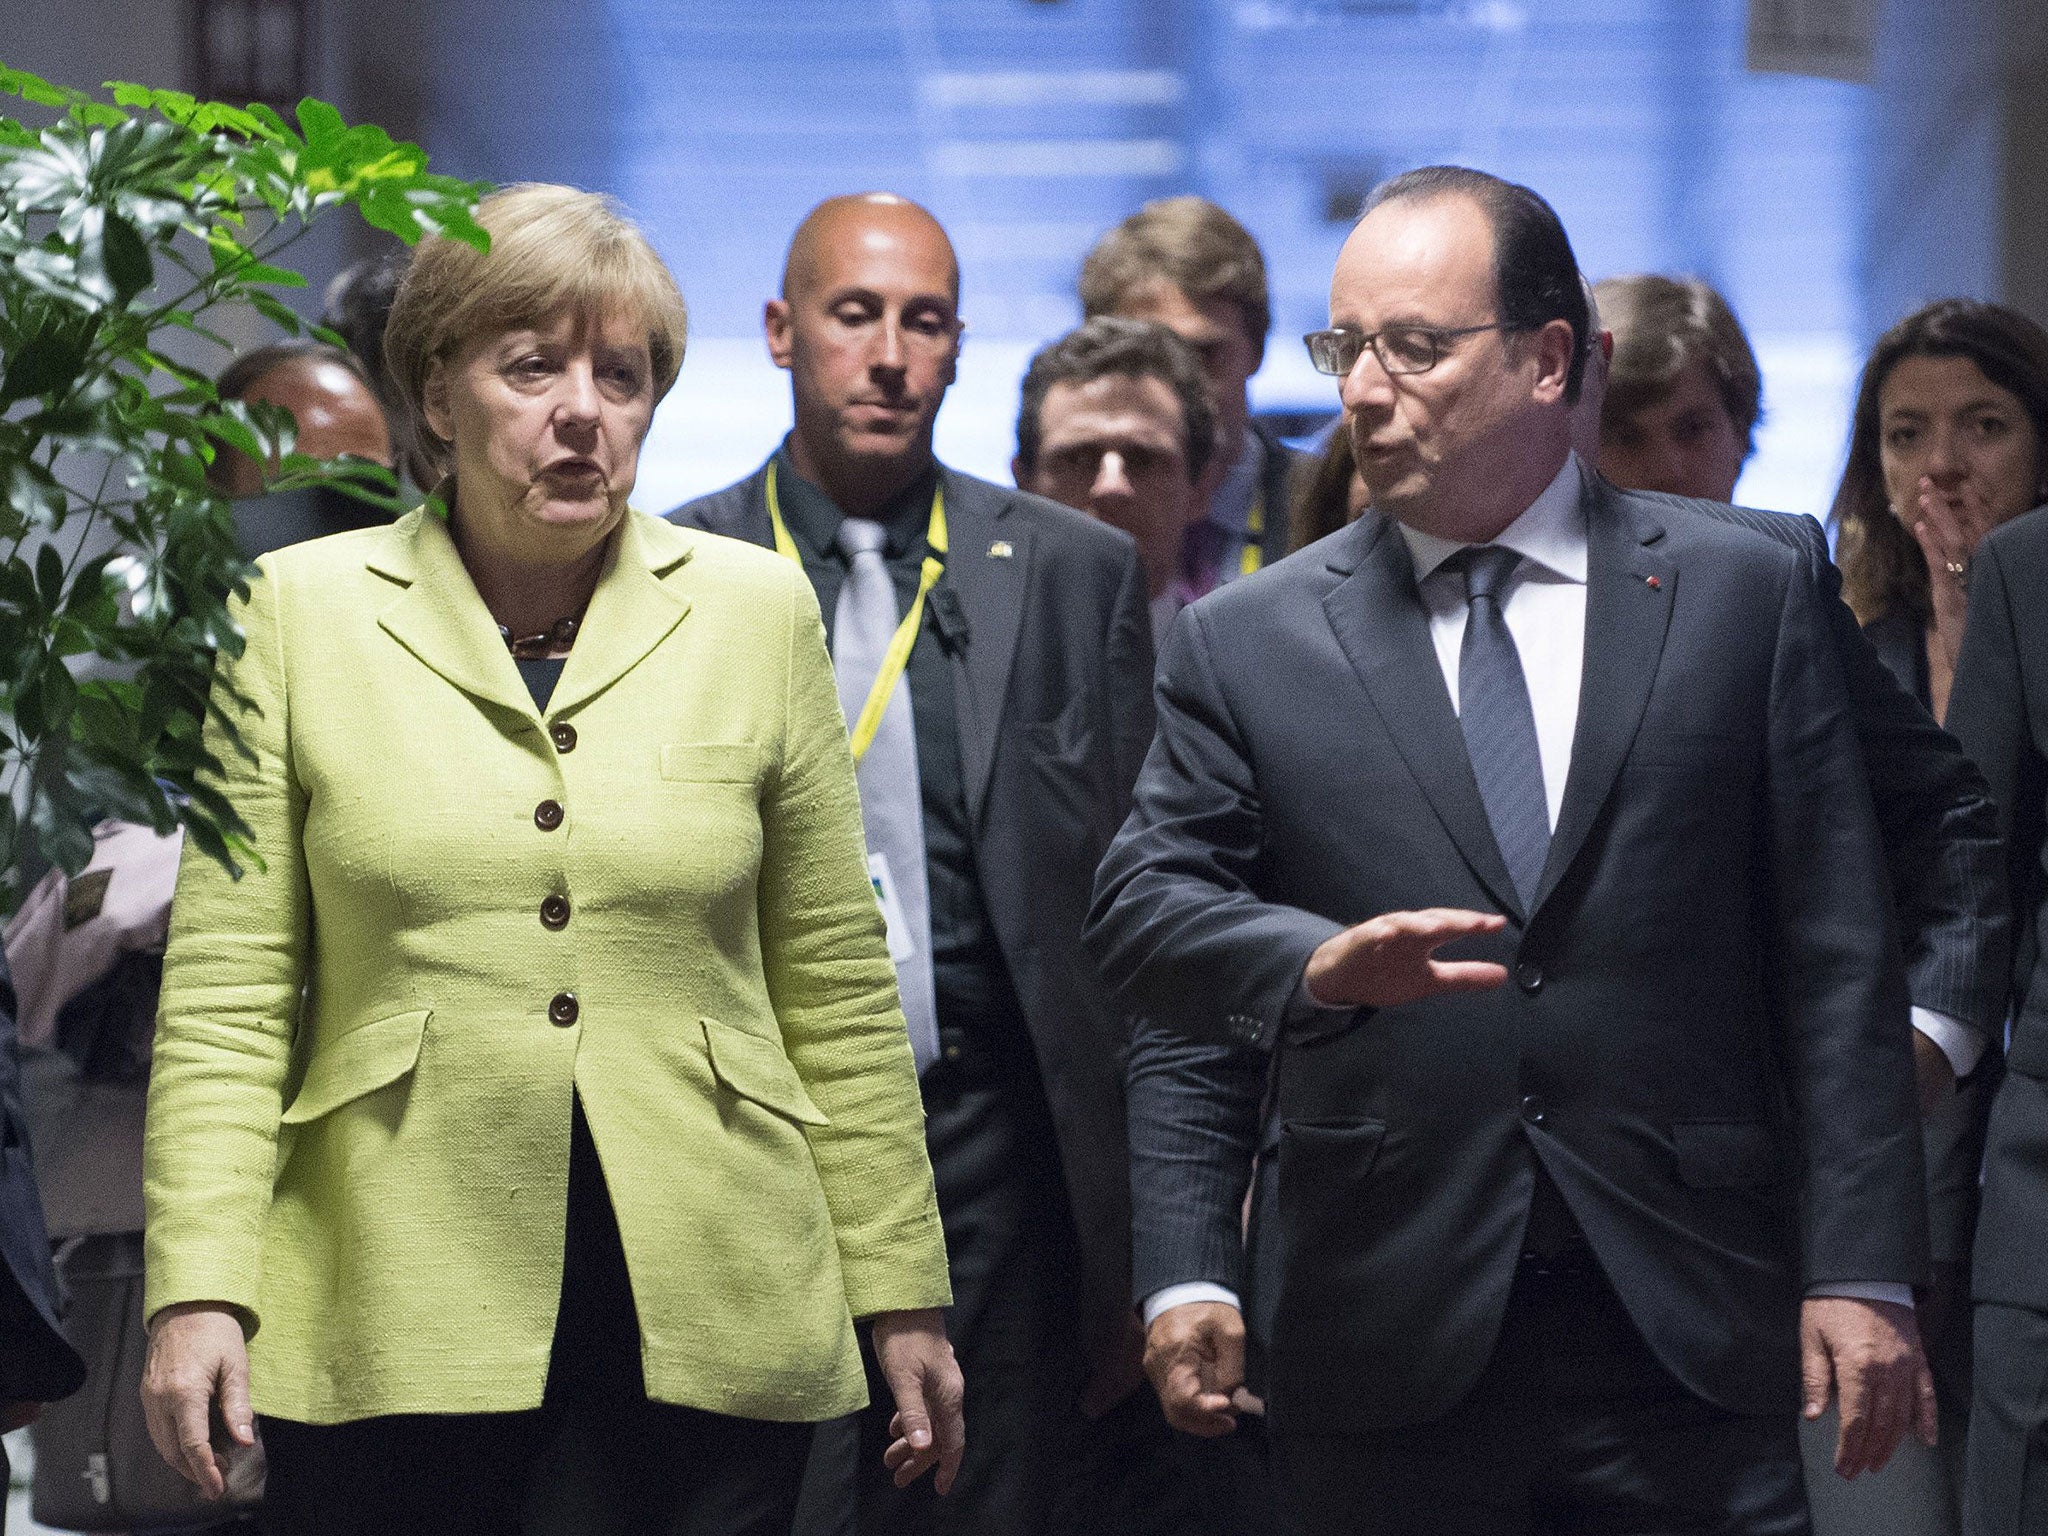 Francois Hollande and Angela Merkel will play a key role in the future of Europe